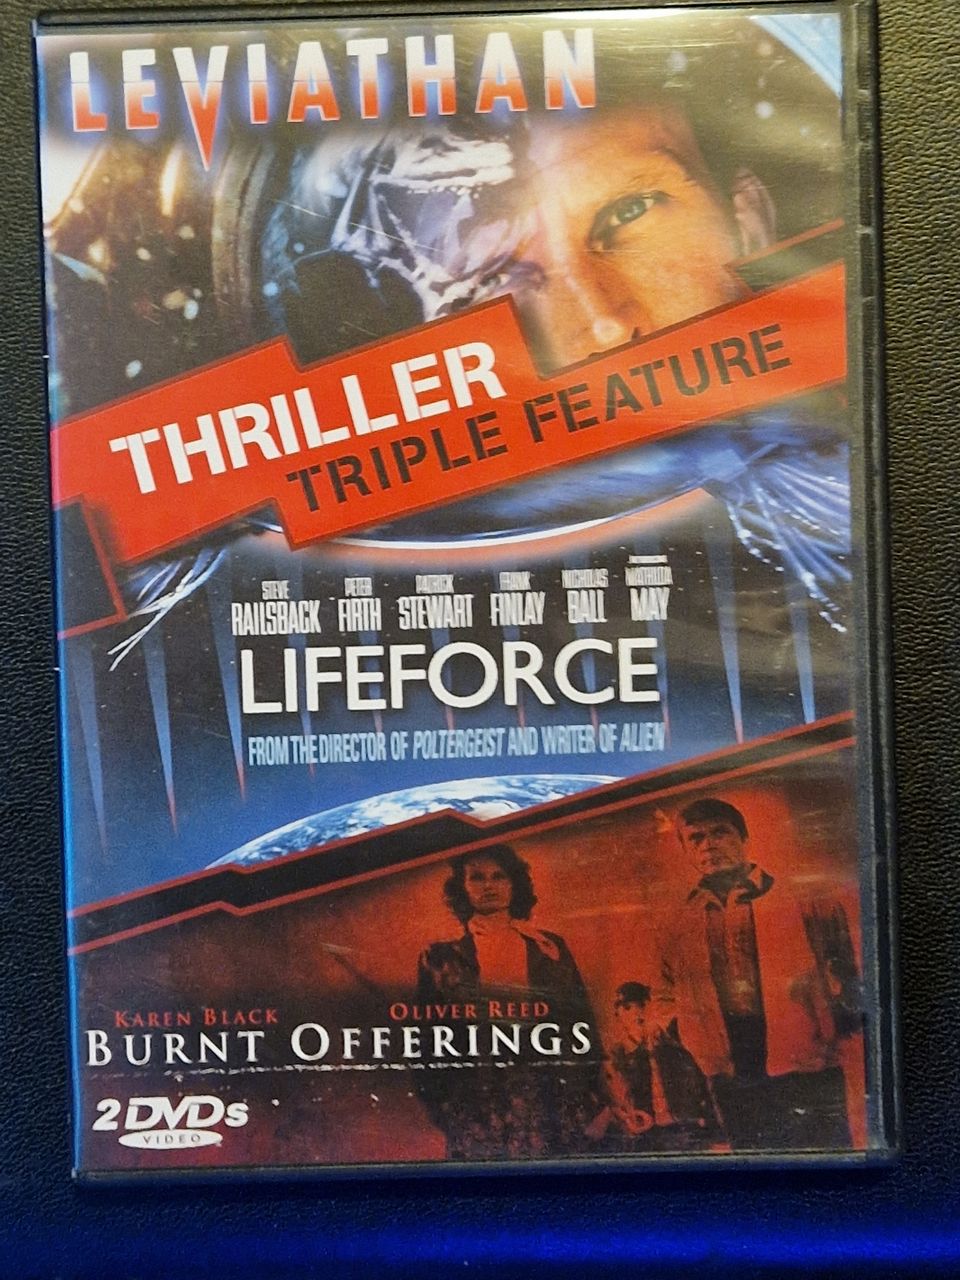 Leviathan / Lifeforce / Burnt Offerings R1 DVD